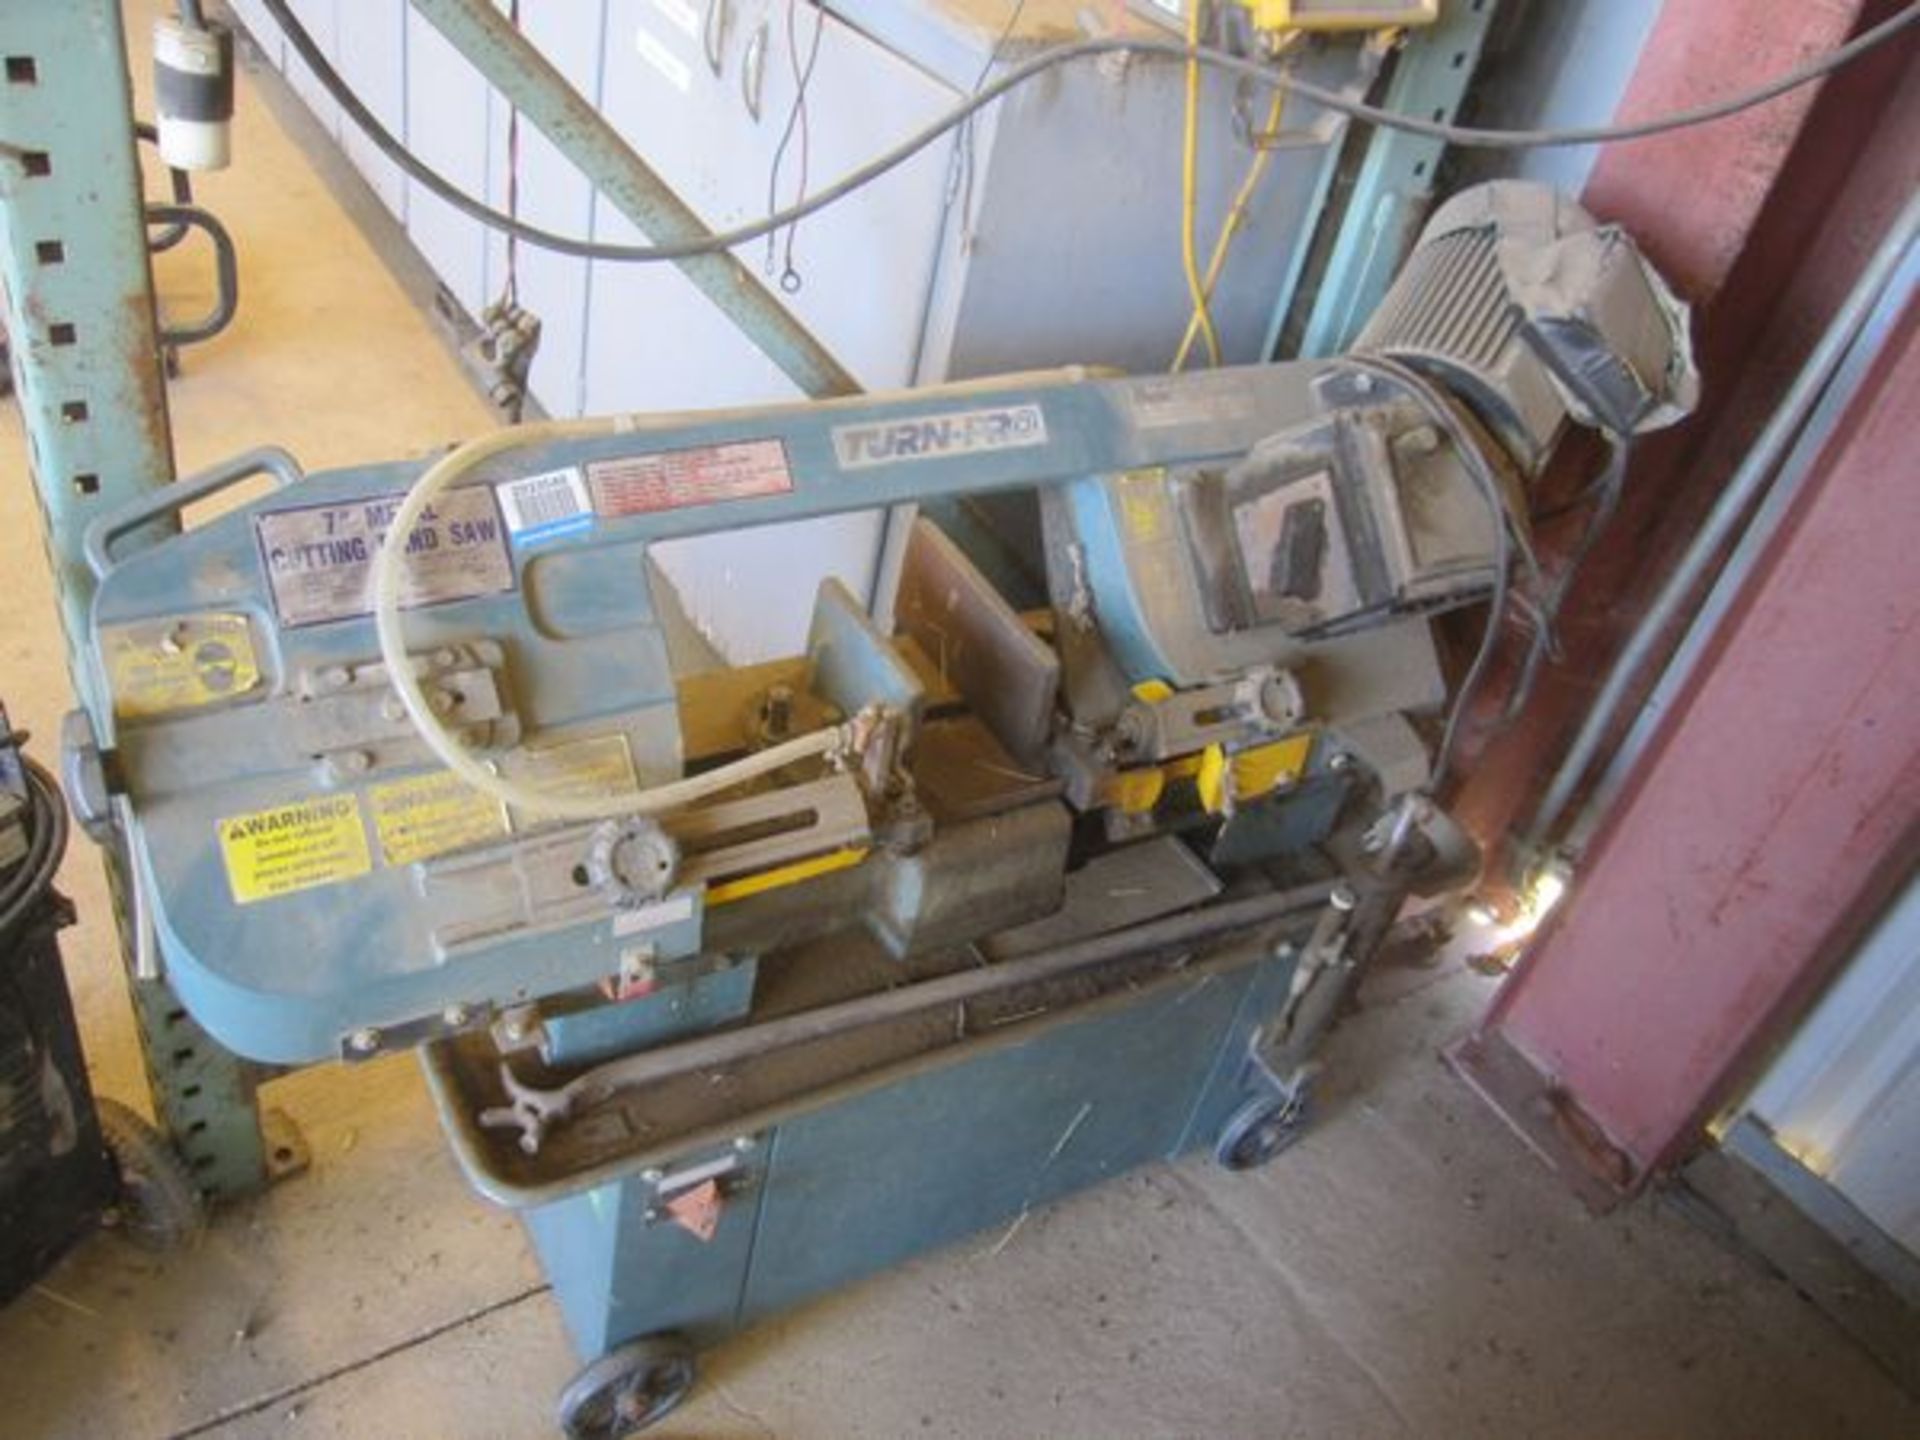 Turn-Pro Model 01712058  7" Metal Cutting Band Saw , Serial Number: 5107061 (Sub Location: - Image 2 of 4